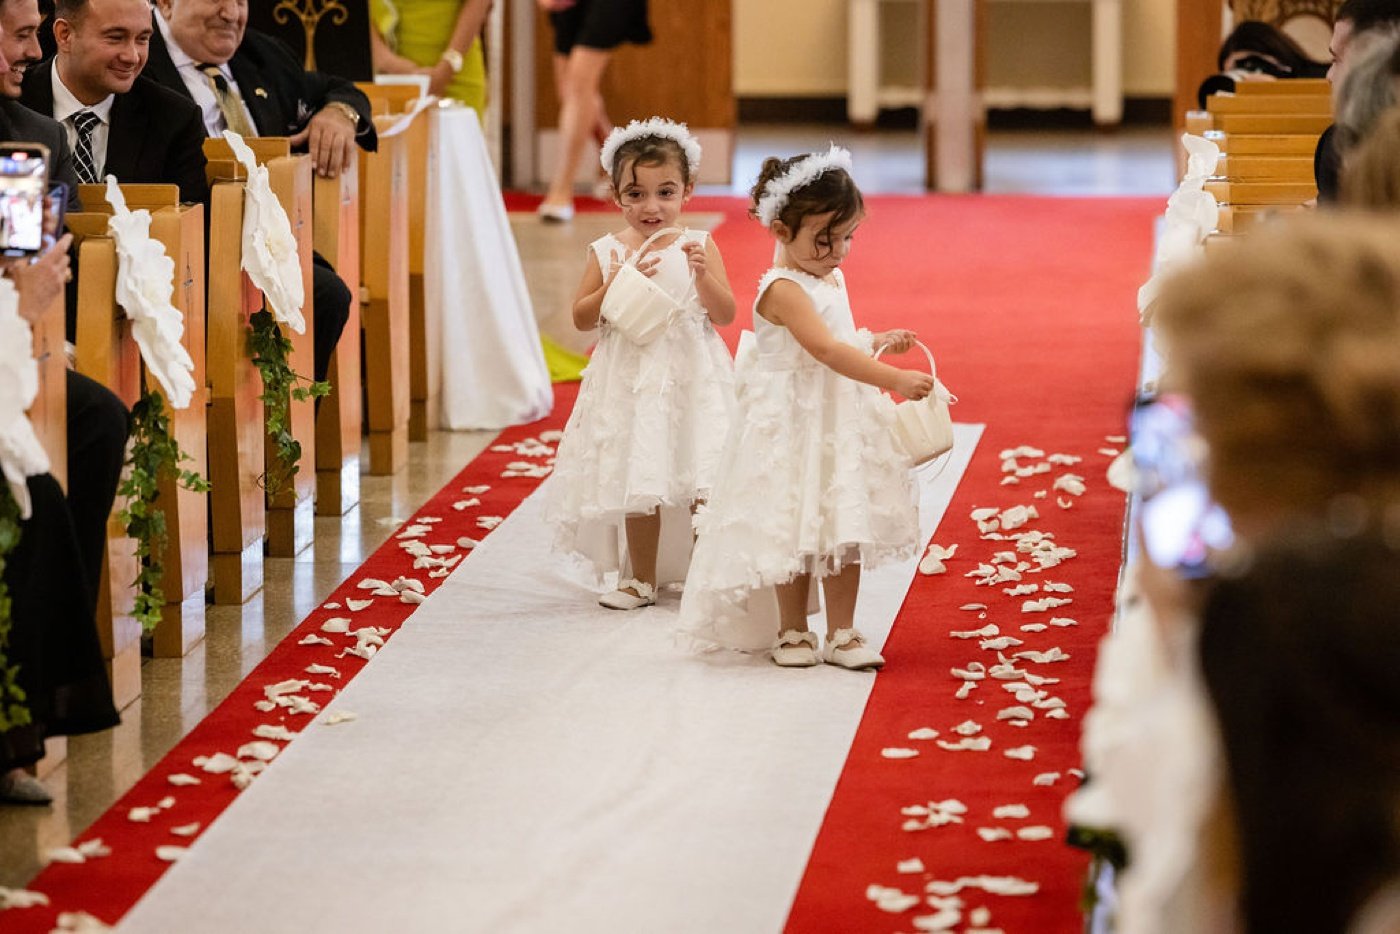 Flower girls tossing petals into the aisle at a Greek Orthodox wedding ceremony in Boston